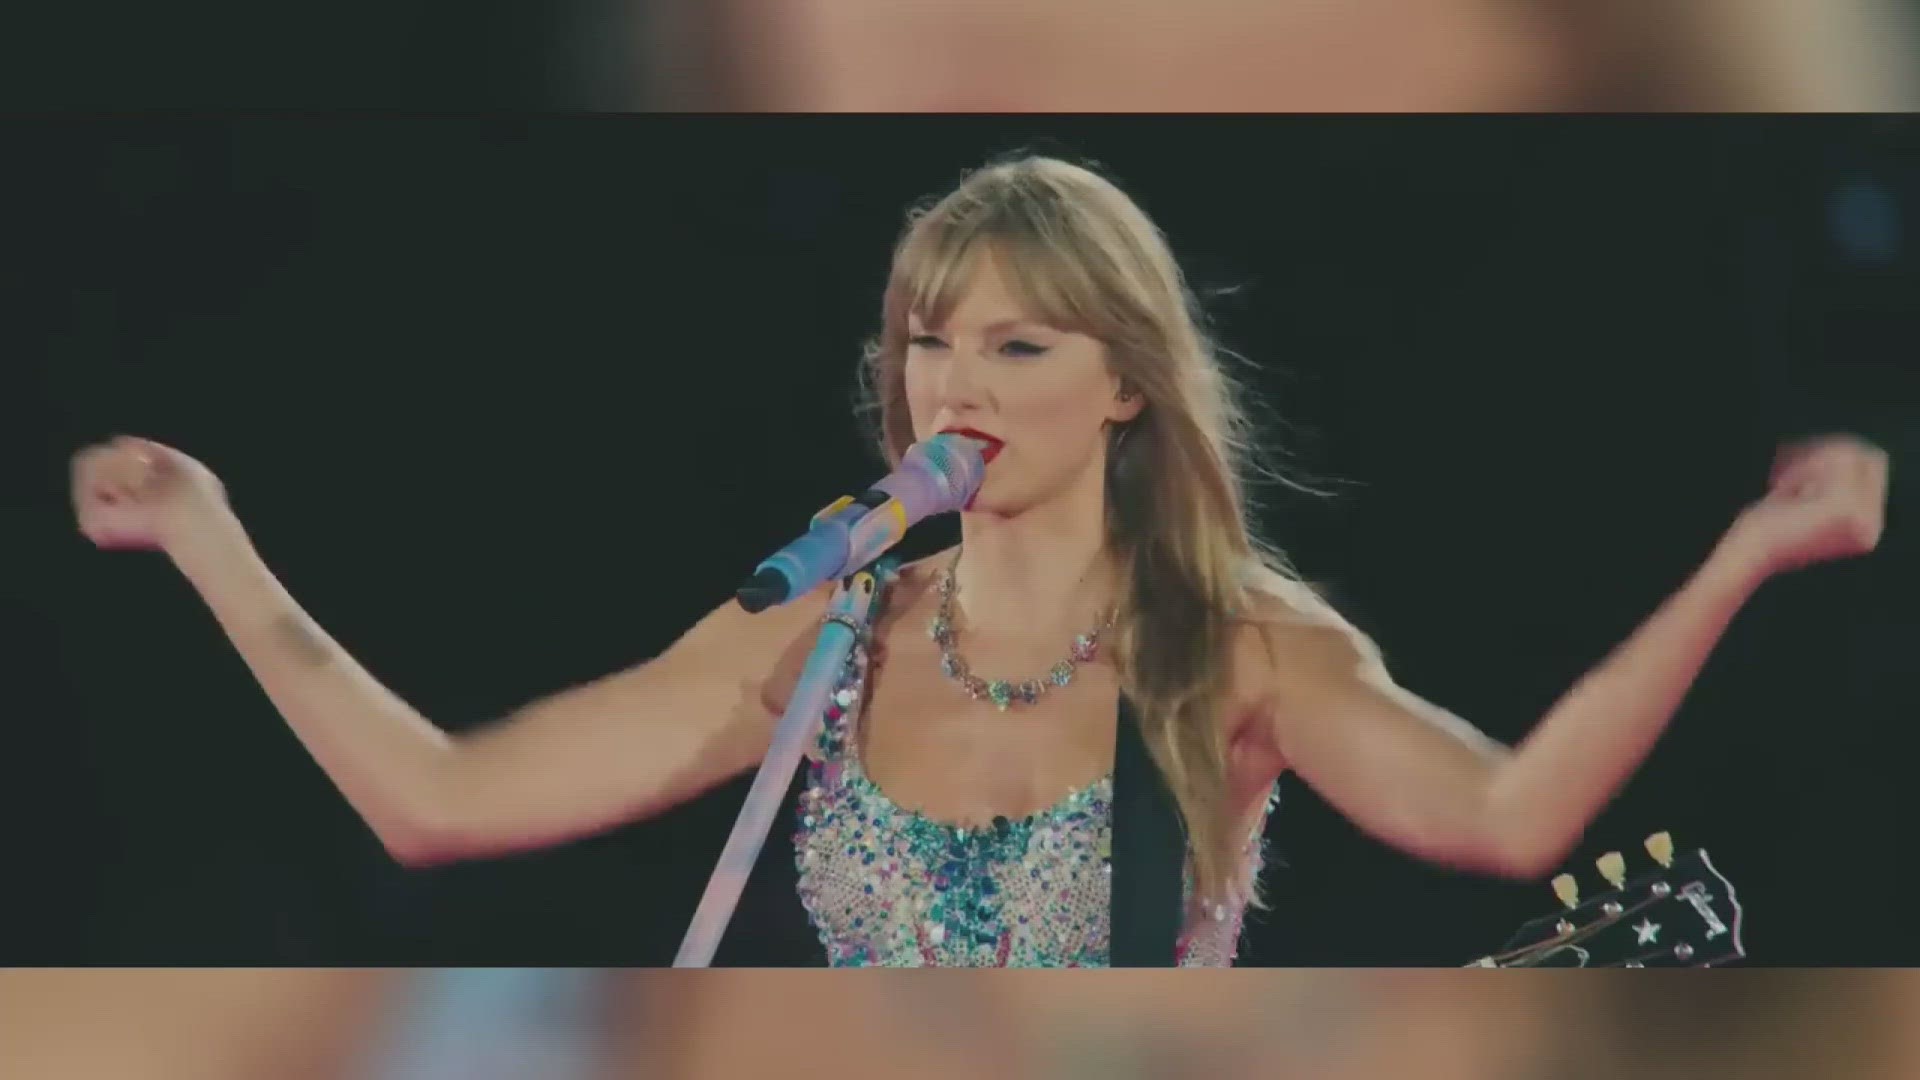 Taylor Swift: “This is my last straw”: Hilarious Taylor Swift memes erupt  after a list of songs were cut from The Eras Tour Concert film